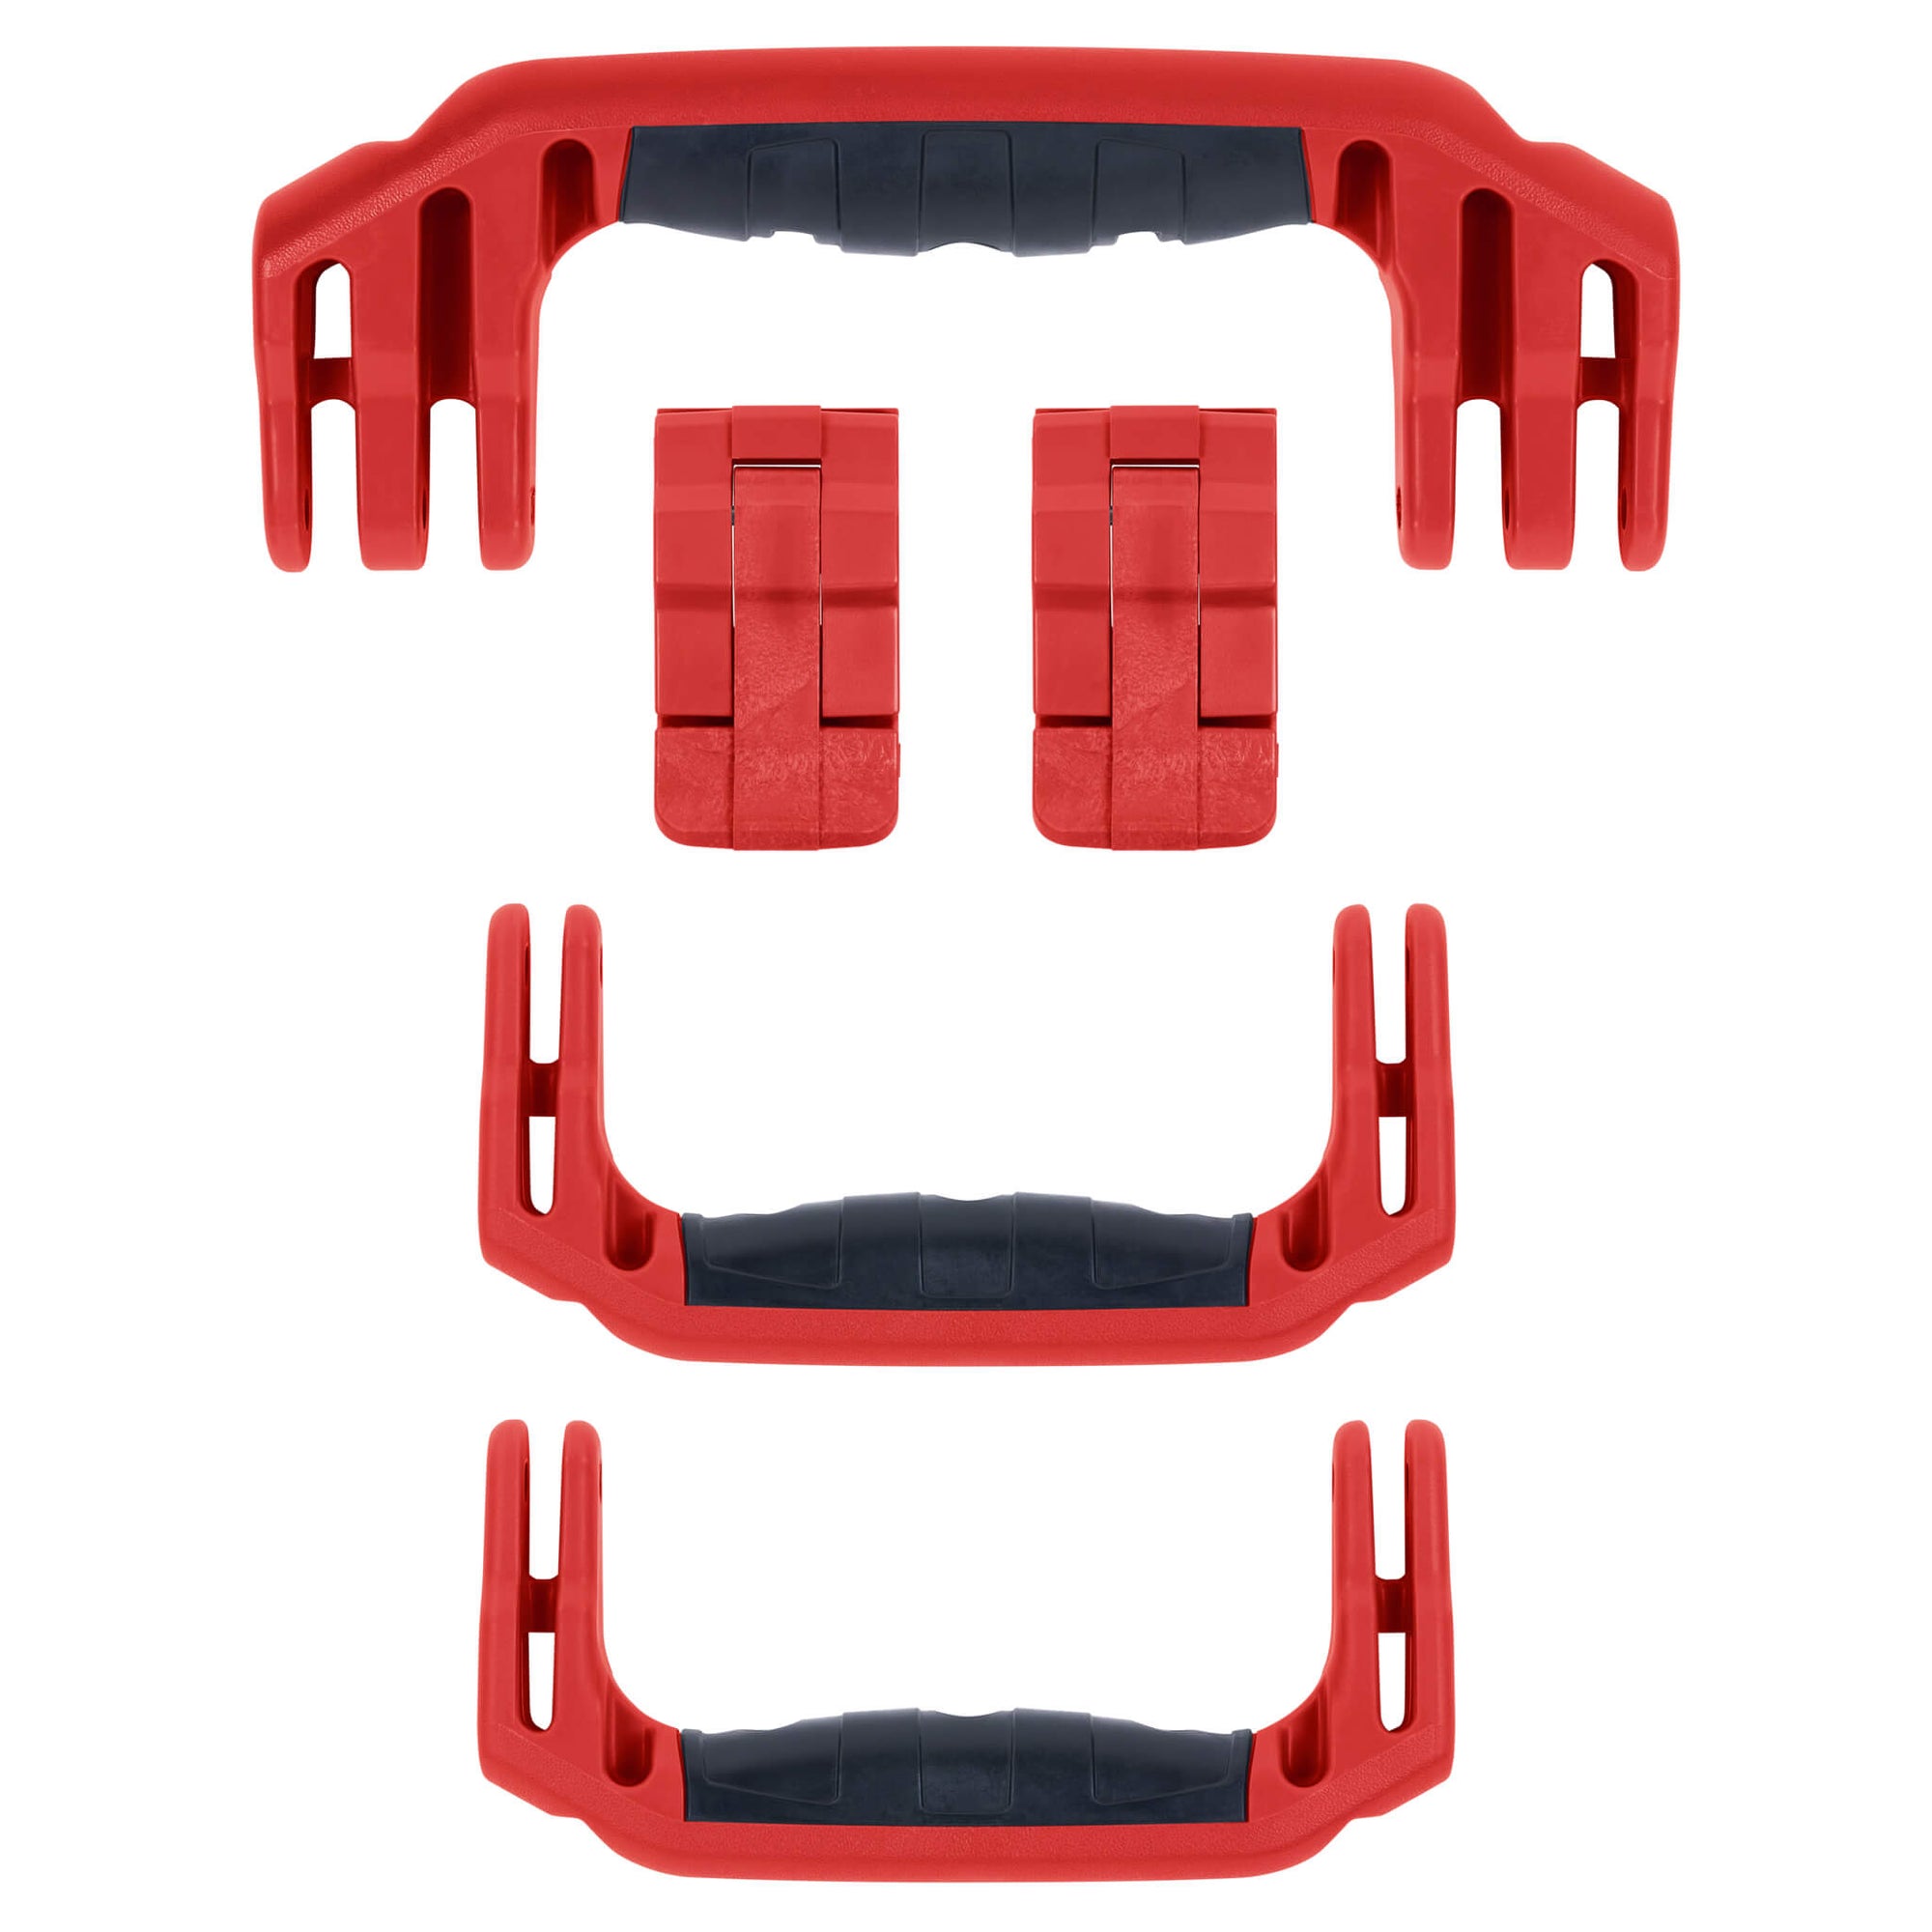 Pelican 1440 Replacement Handles & Latches, Red (Set of 3 Handles, 2 Latches) ColorCase 